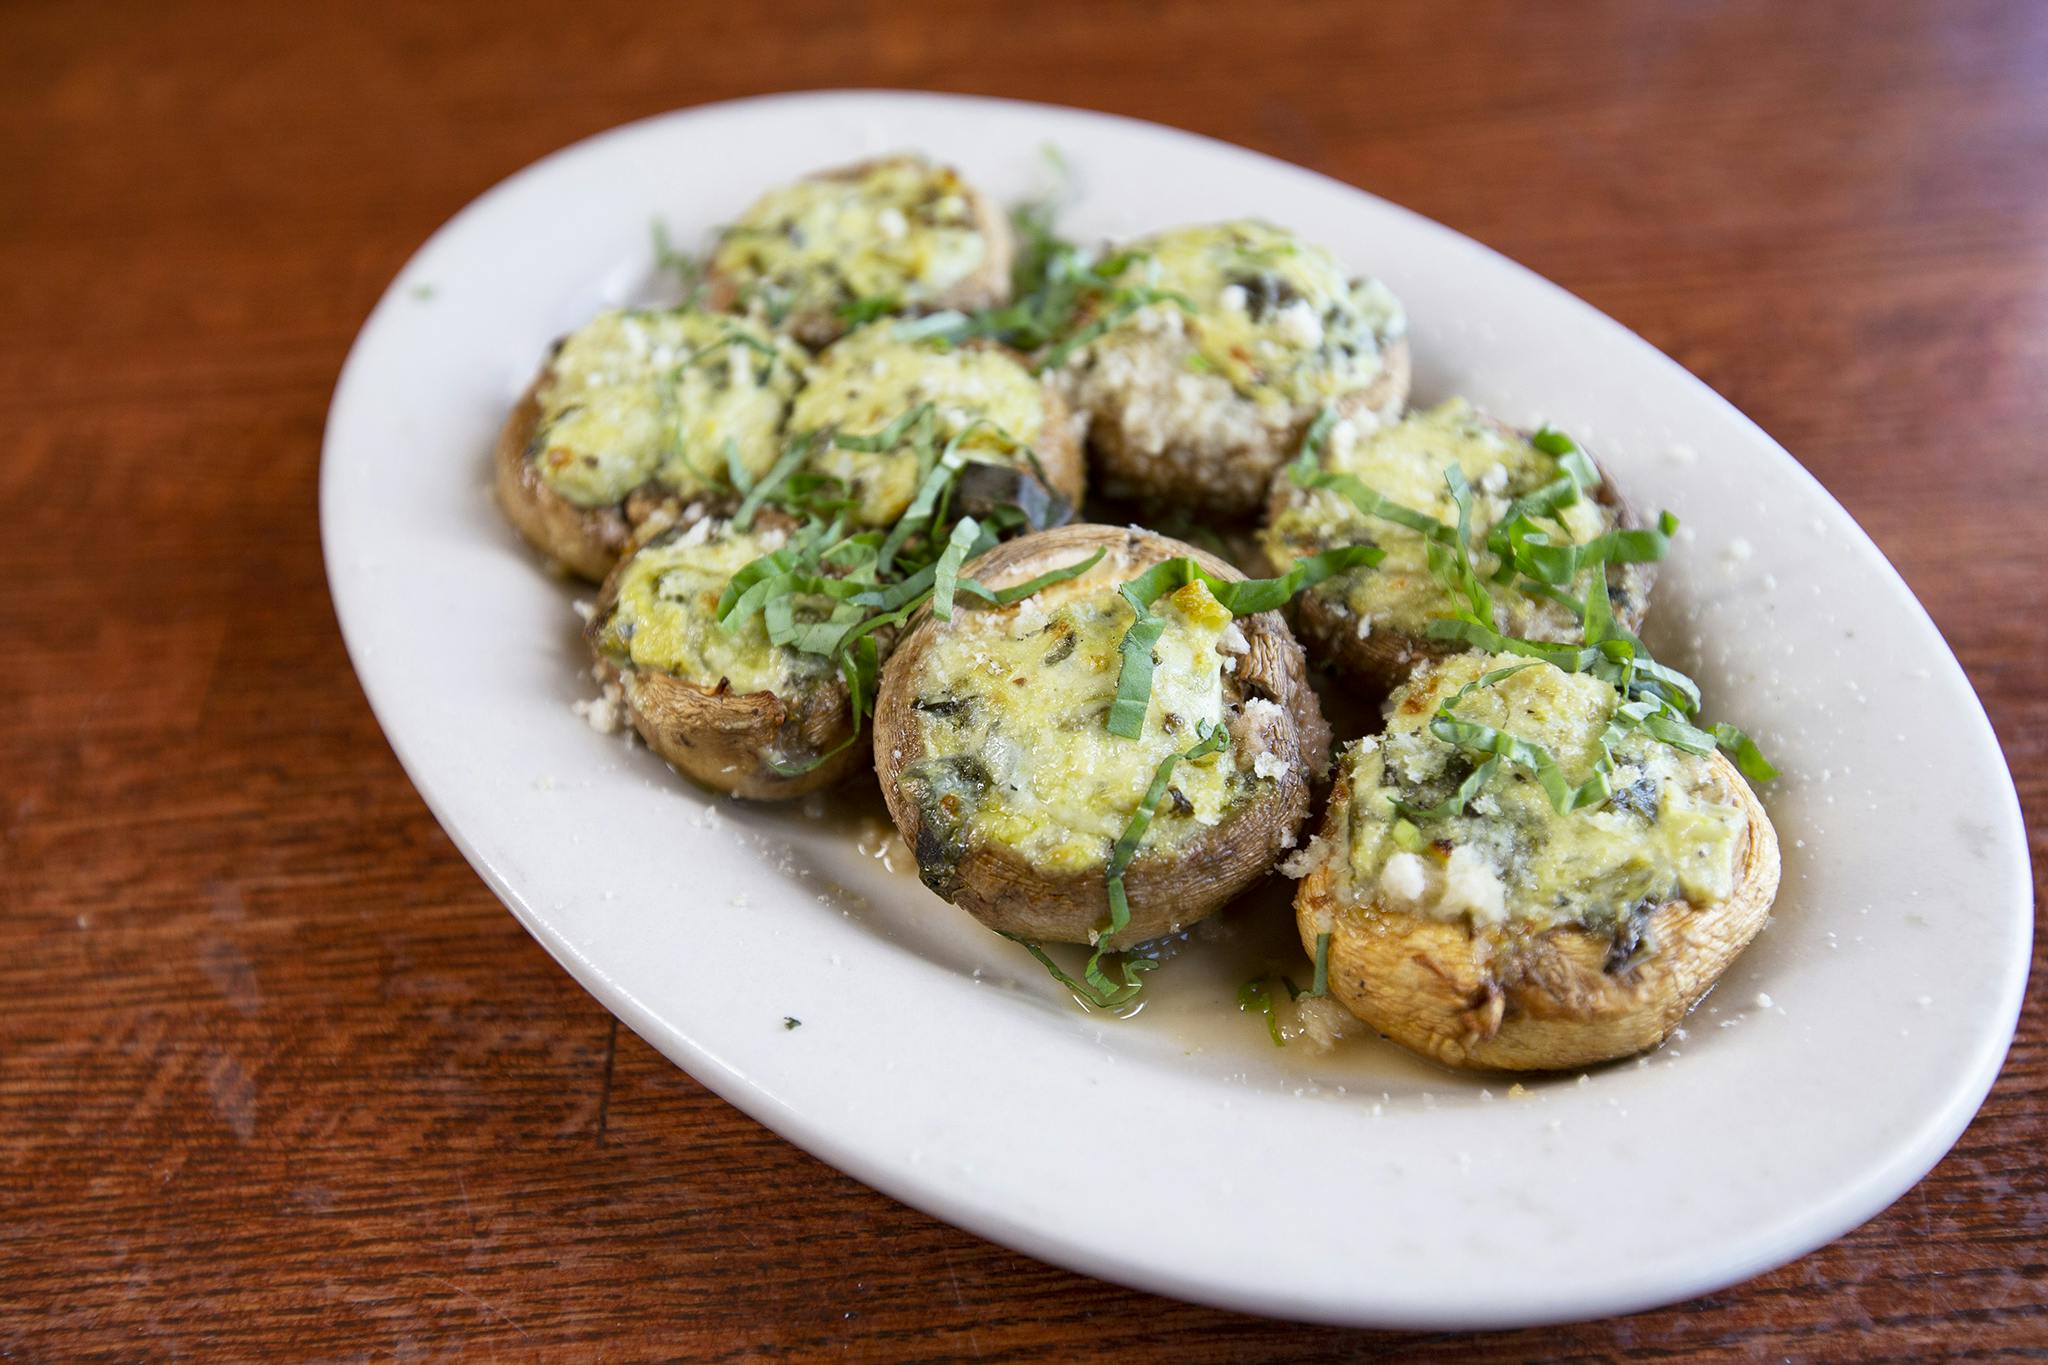 Stuffed Mushrooms from Candlelite Chicago in Chicago, IL